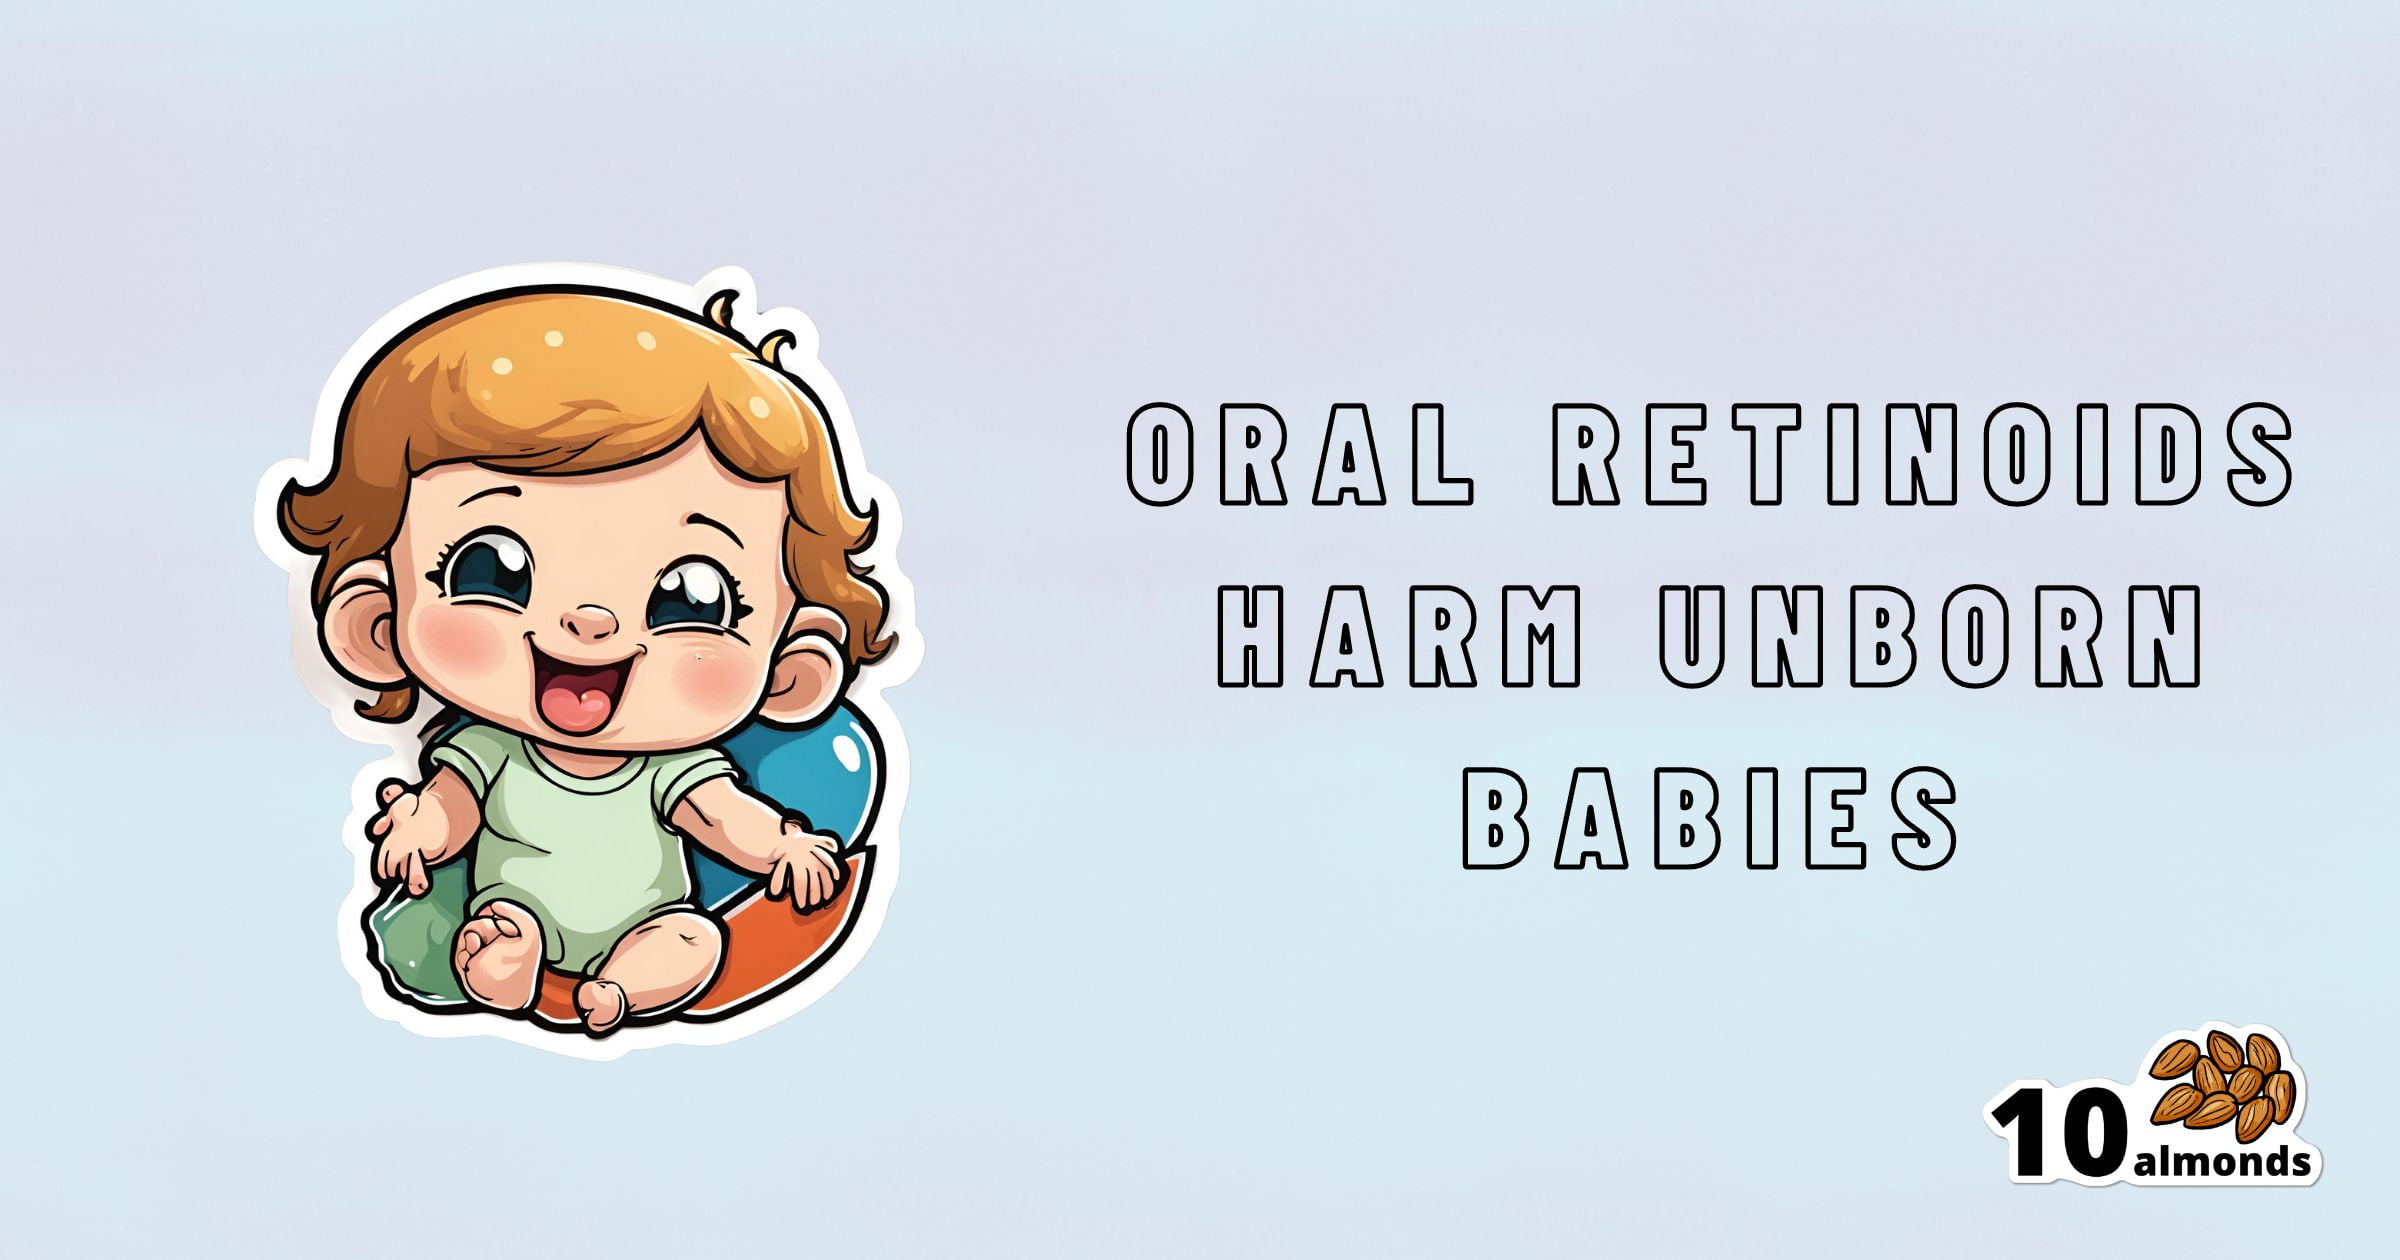 Illustration of a happy, sitting baby with a pacifier. The text "ORAL RETINOIDS HARM UNBORN BABIES" is prominently displayed to the right of the baby, highlighting their risk when treating acne. In the bottom right corner, the text "10 almonds" with accompanying almond graphics is shown.